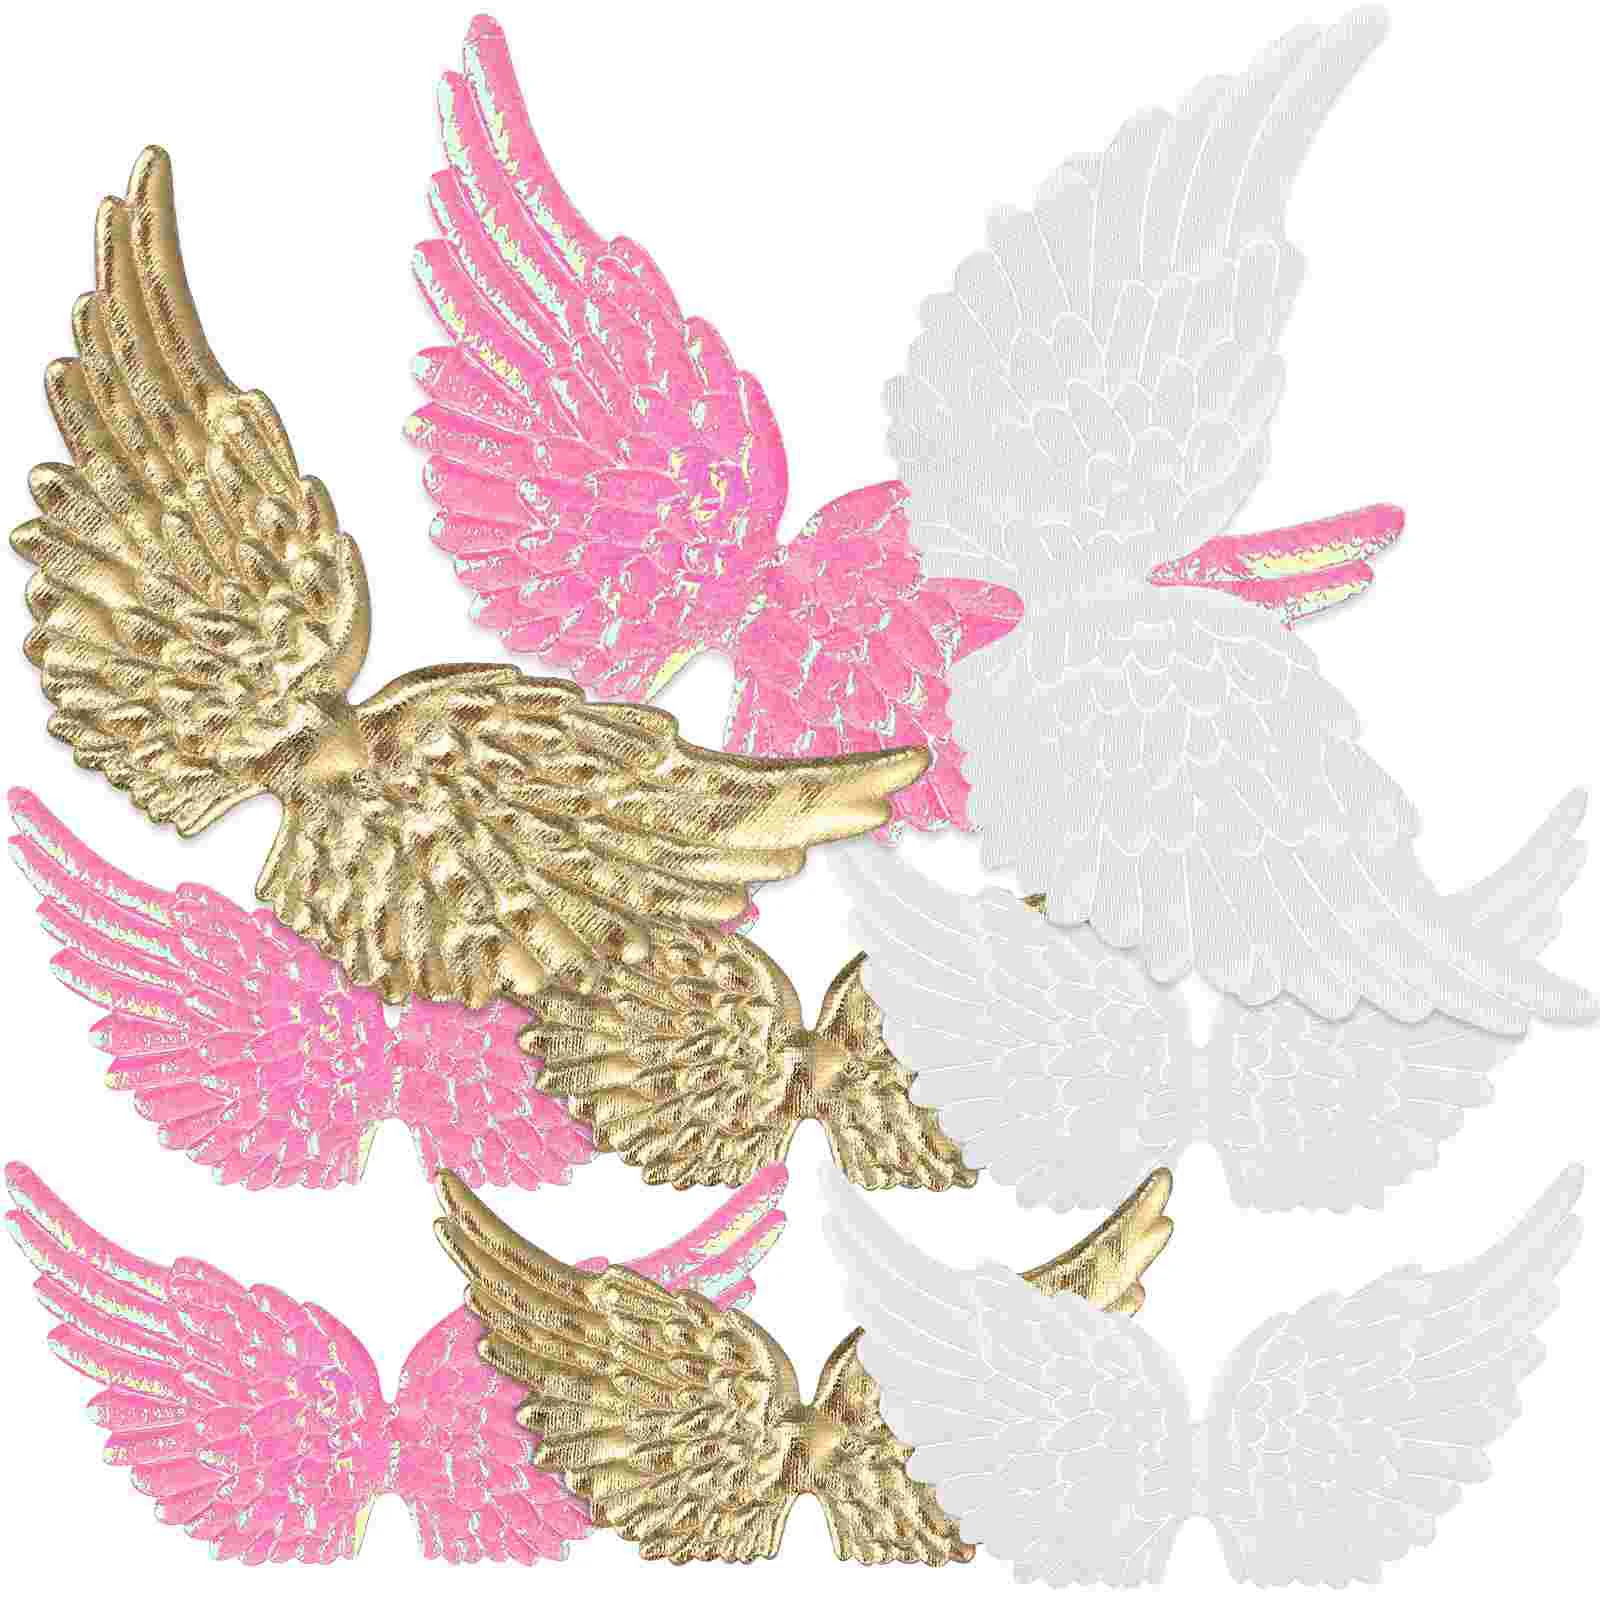 

36 Pcs Angel Wings Decorative Appliques Embellishments Fairy Accessories Miniature Patches Craft Projects Props